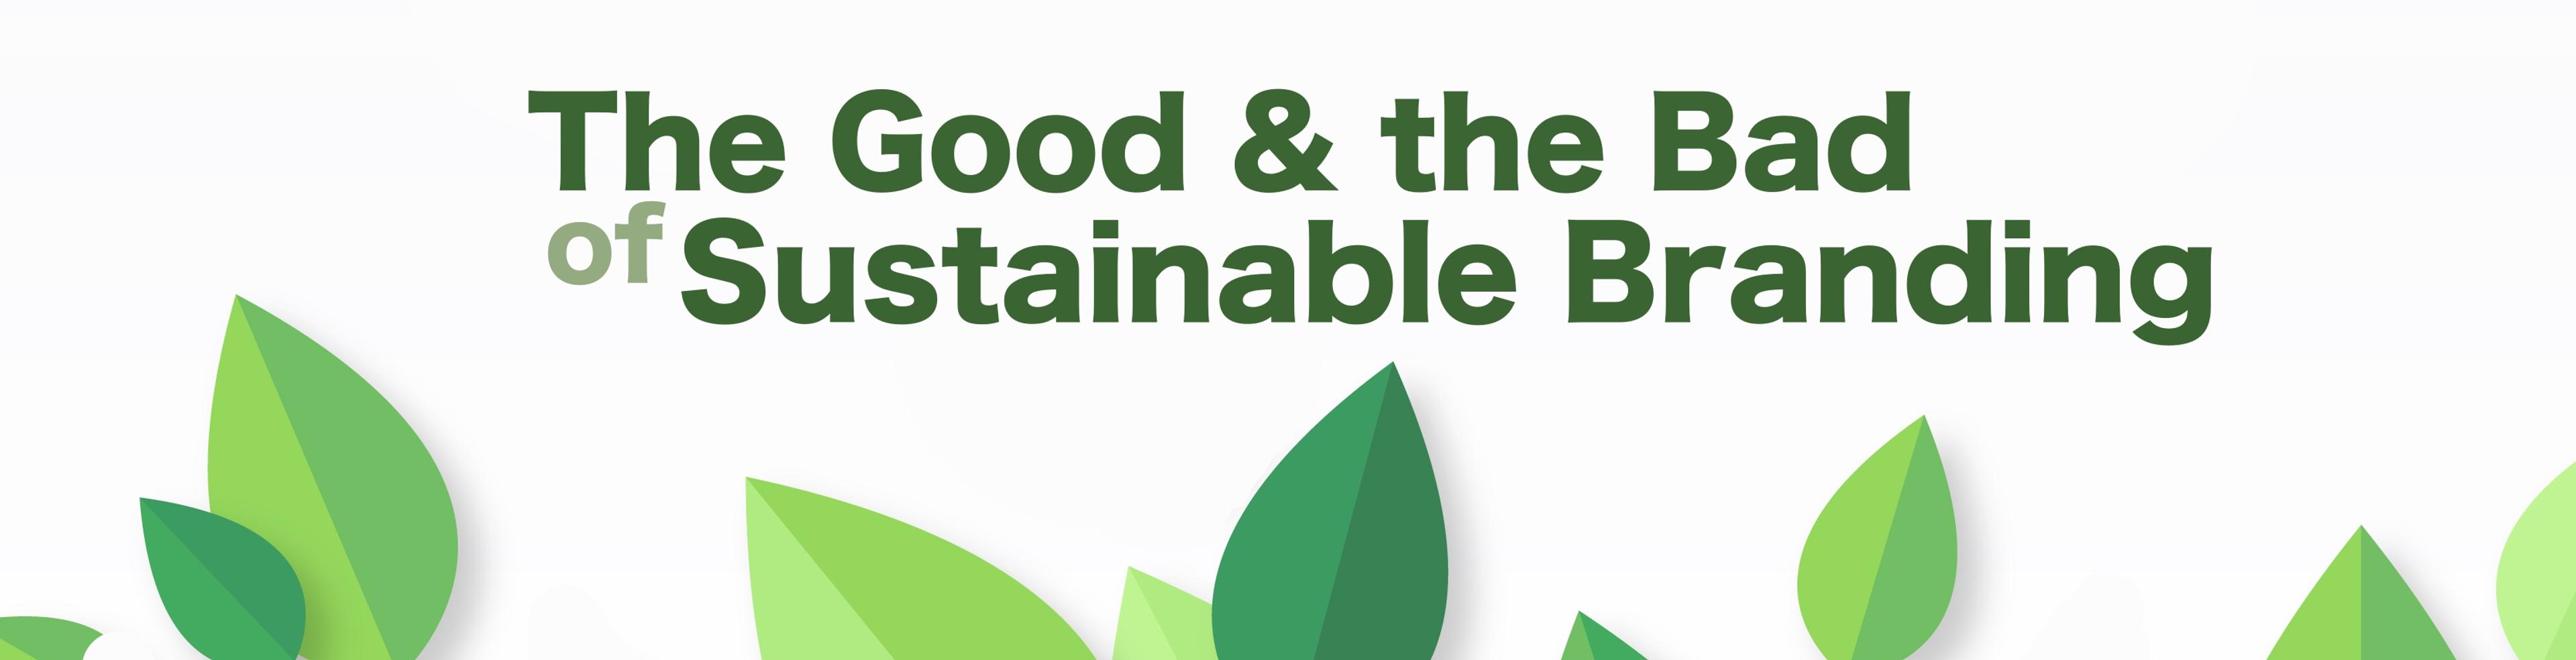 The Good & the Bad of Sustainable Branding